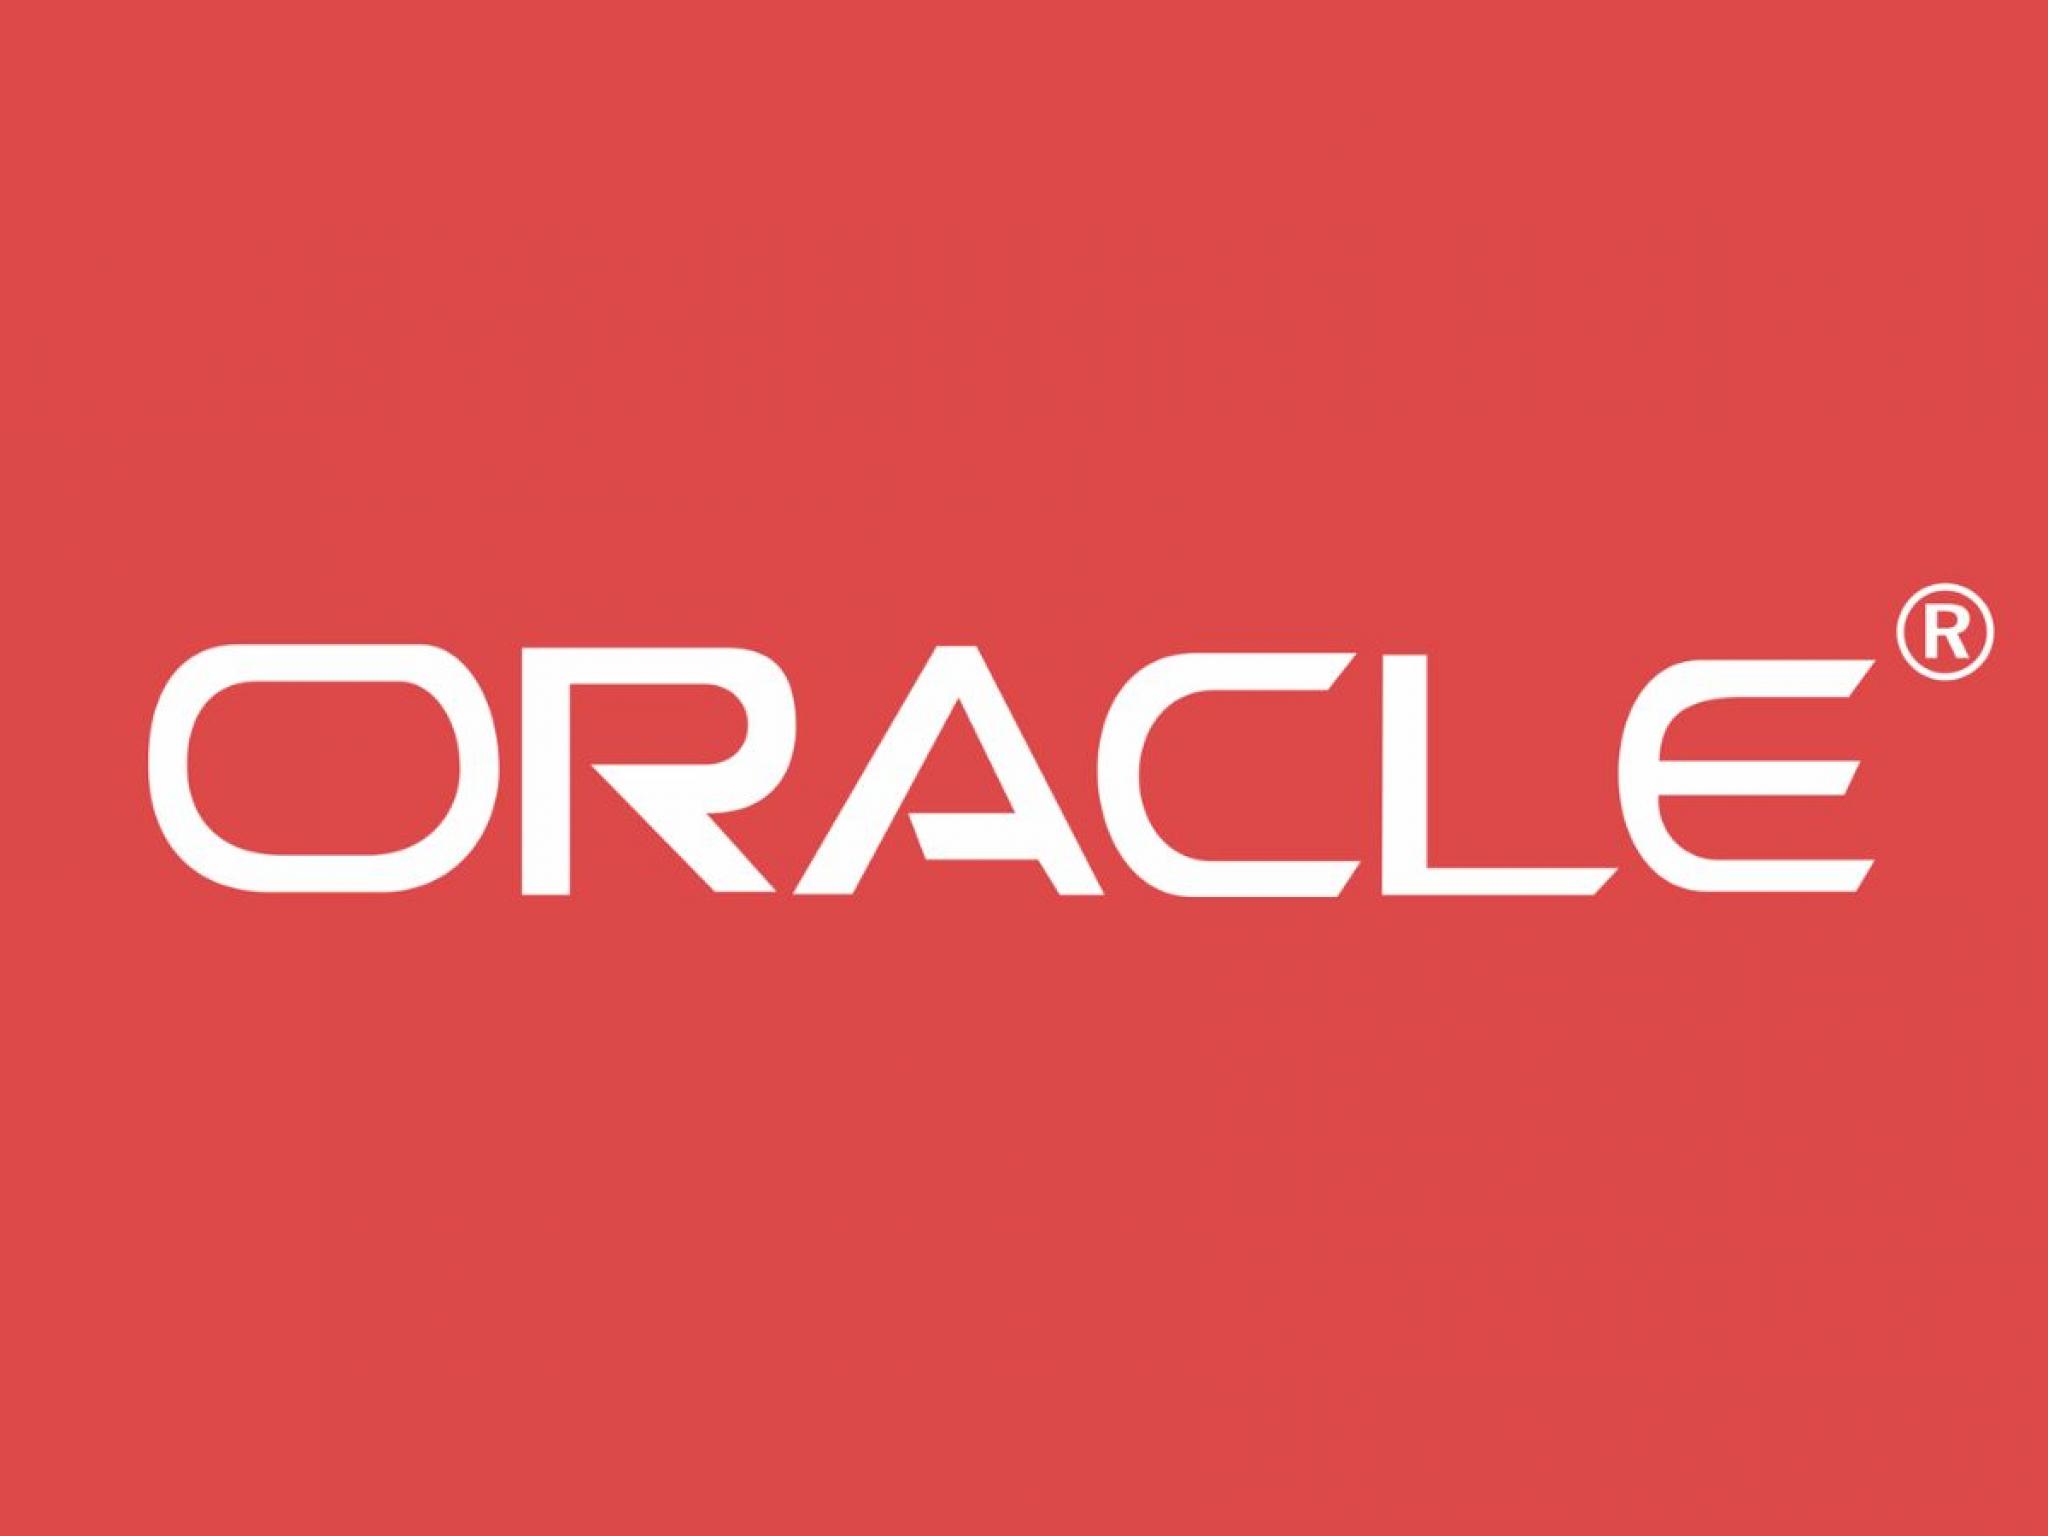  why-oracle-shares-are-trading-higher-by-around-13-here-are-20-stocks-moving-premarket 